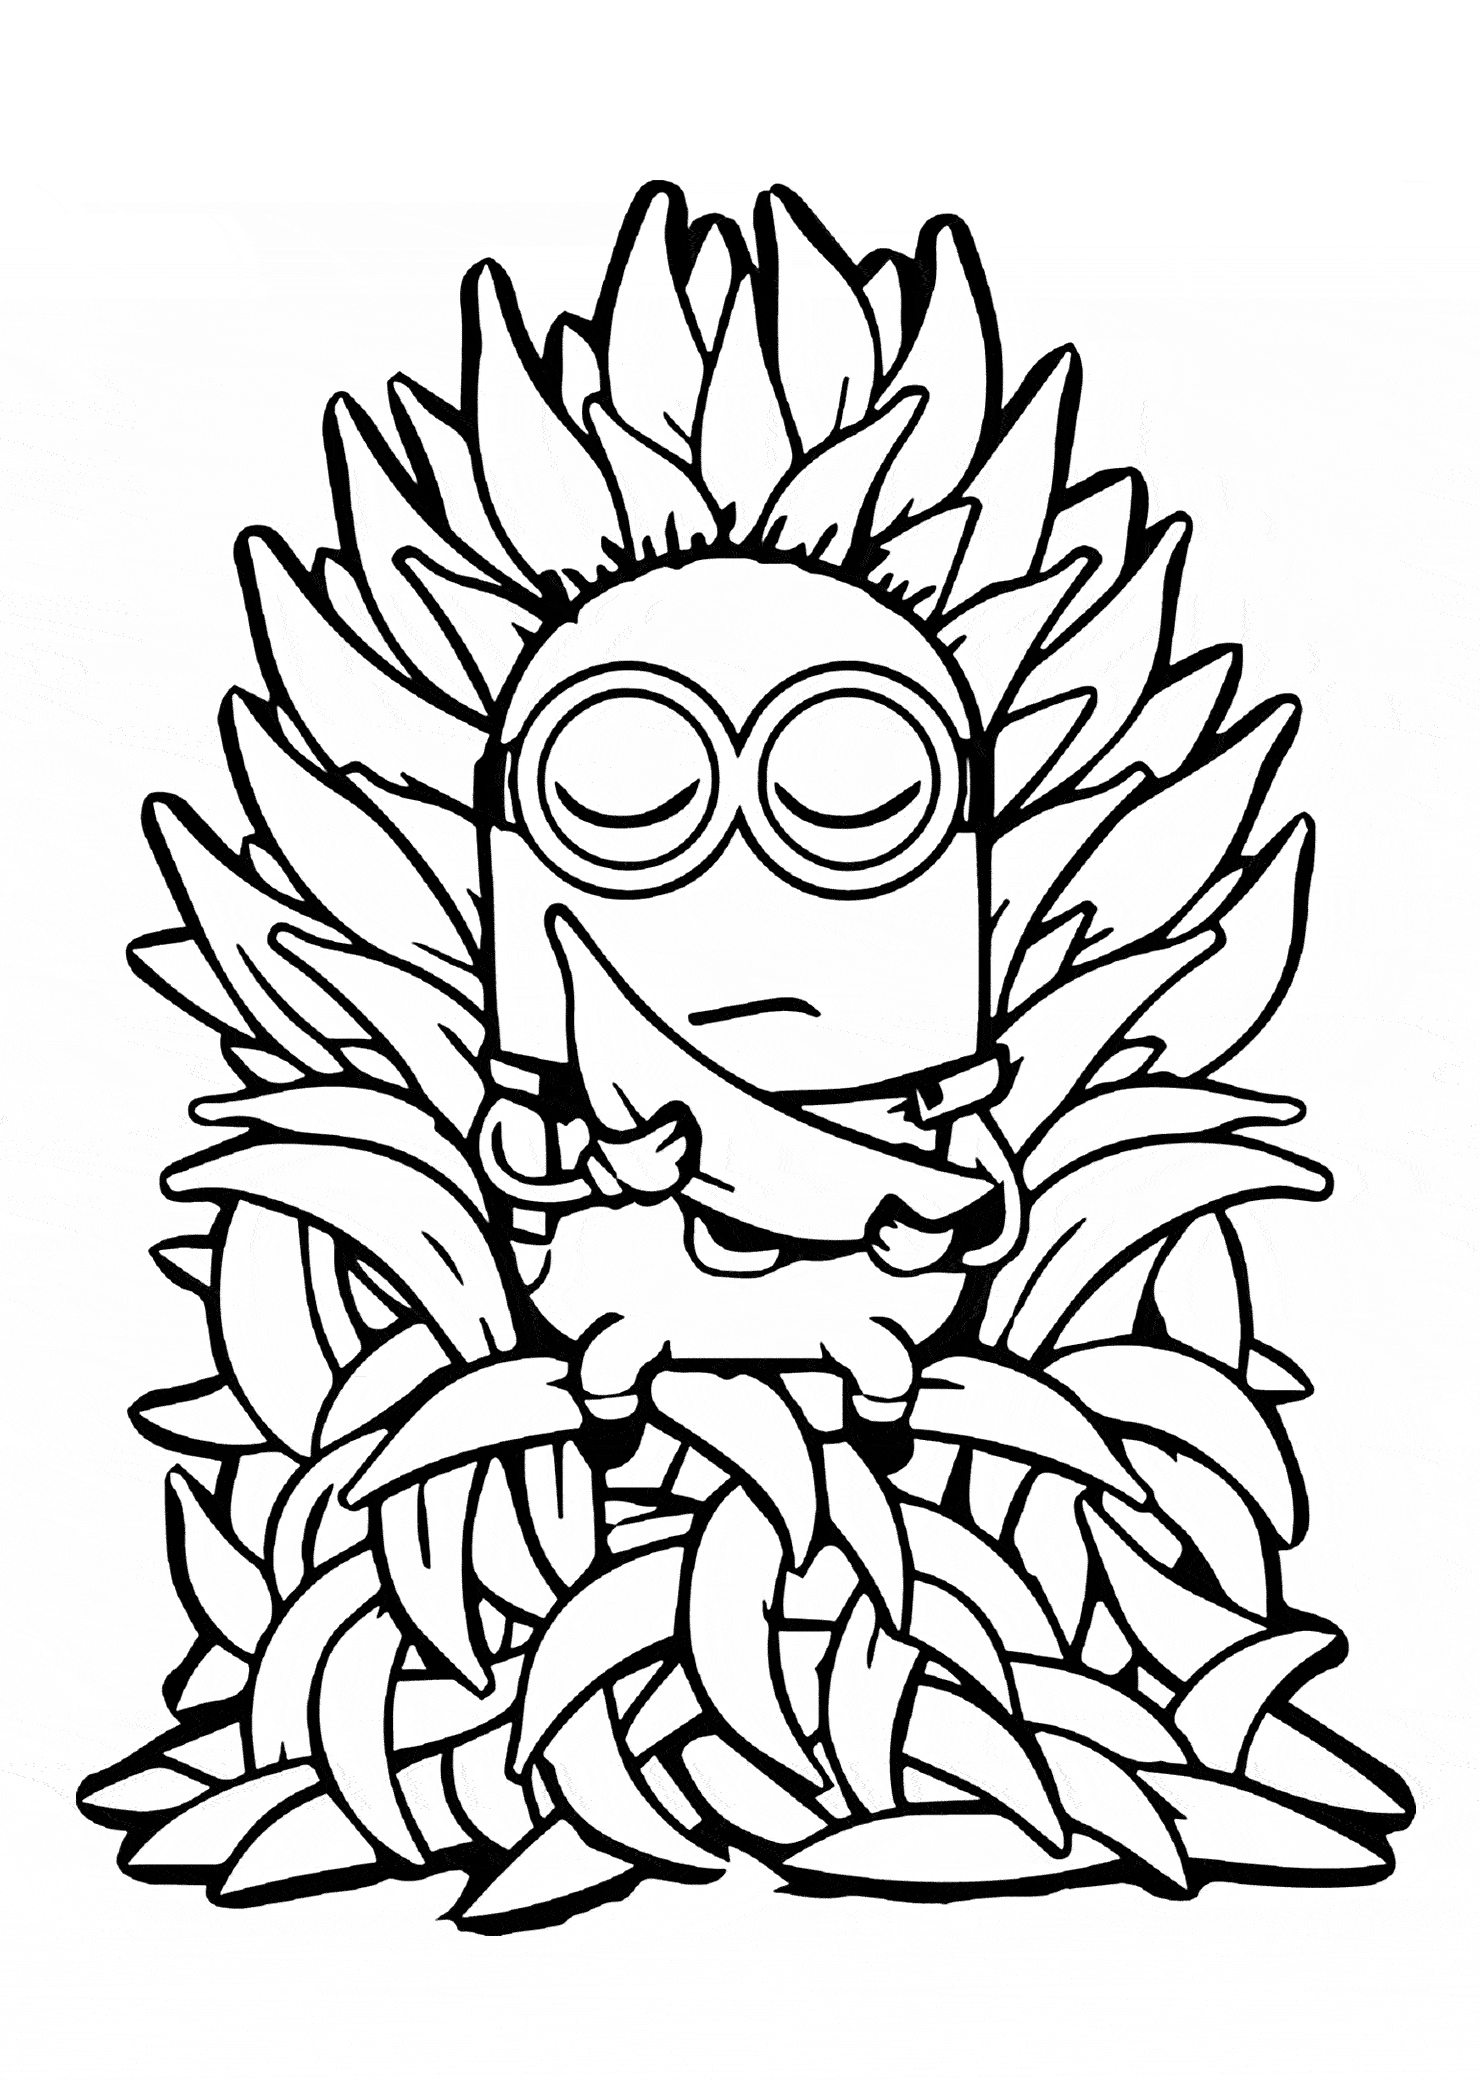 Super simple Minions coloring page